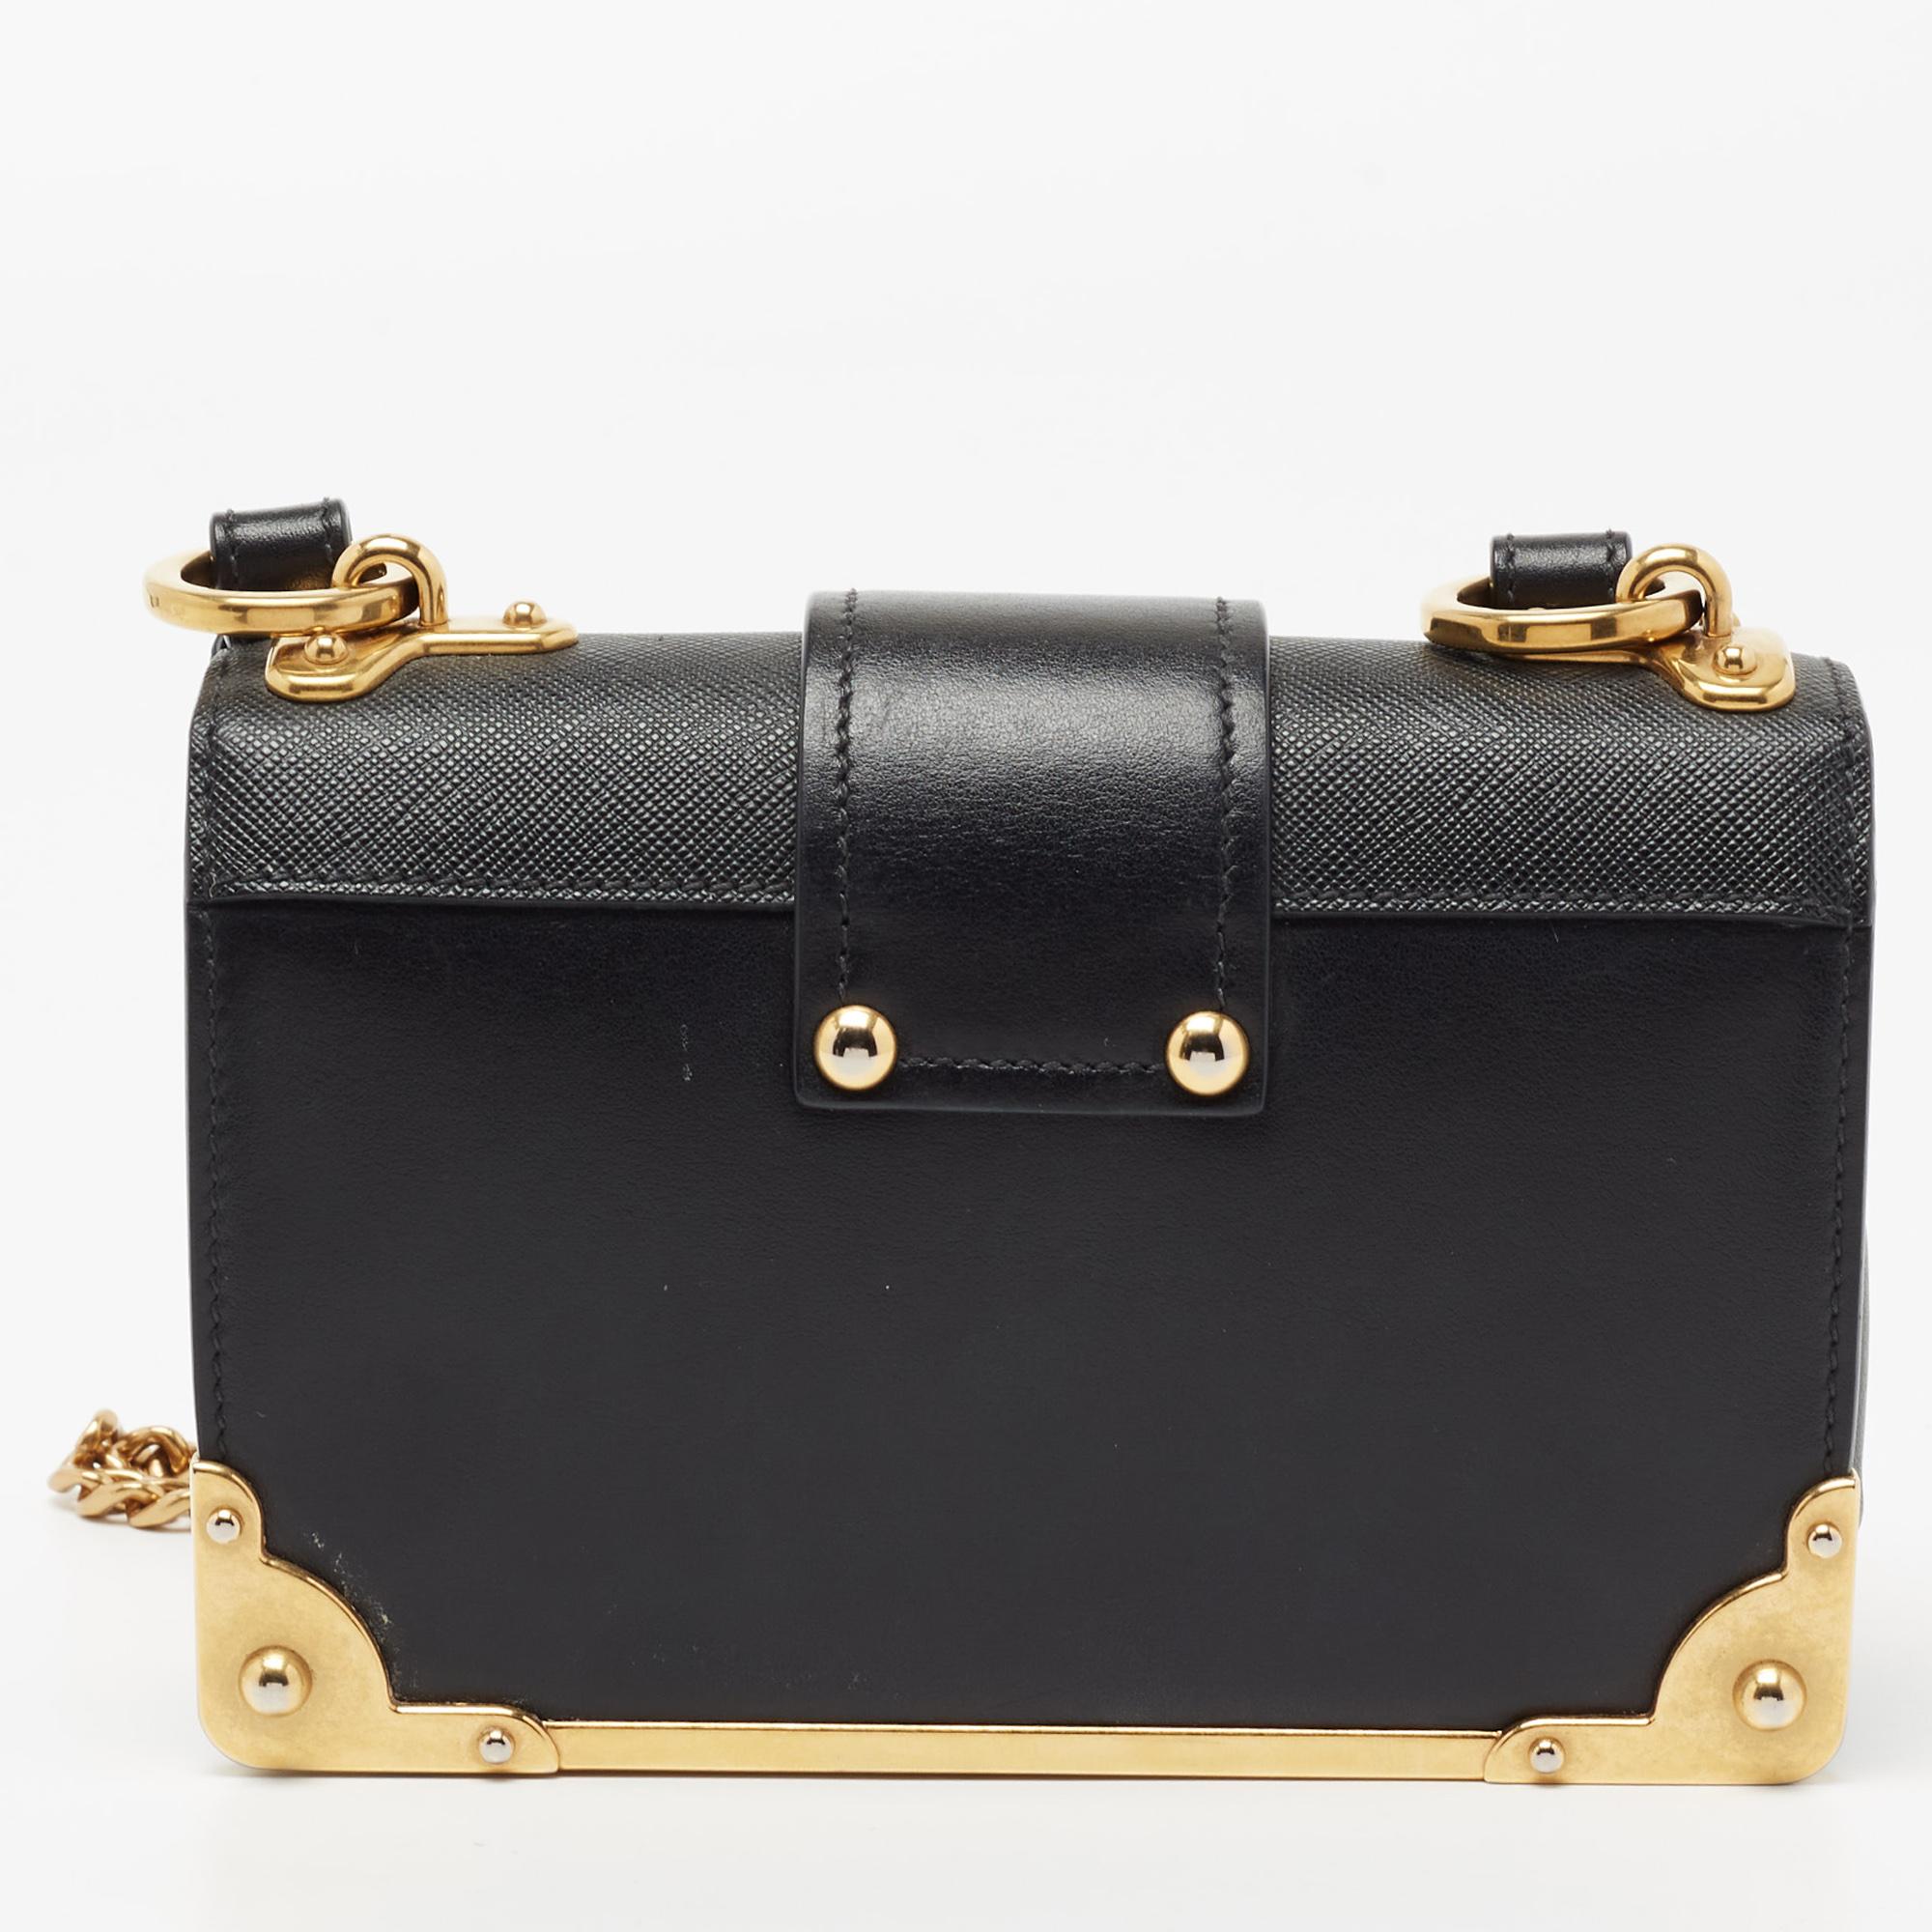 Inspired by valuable books from ancient times, the Cahier by Prada is a best-seller. This bag is crafted using black leather and gold-tone hardware. The flap closure with the brand logo opens to a leather-lined interior with enough space for your